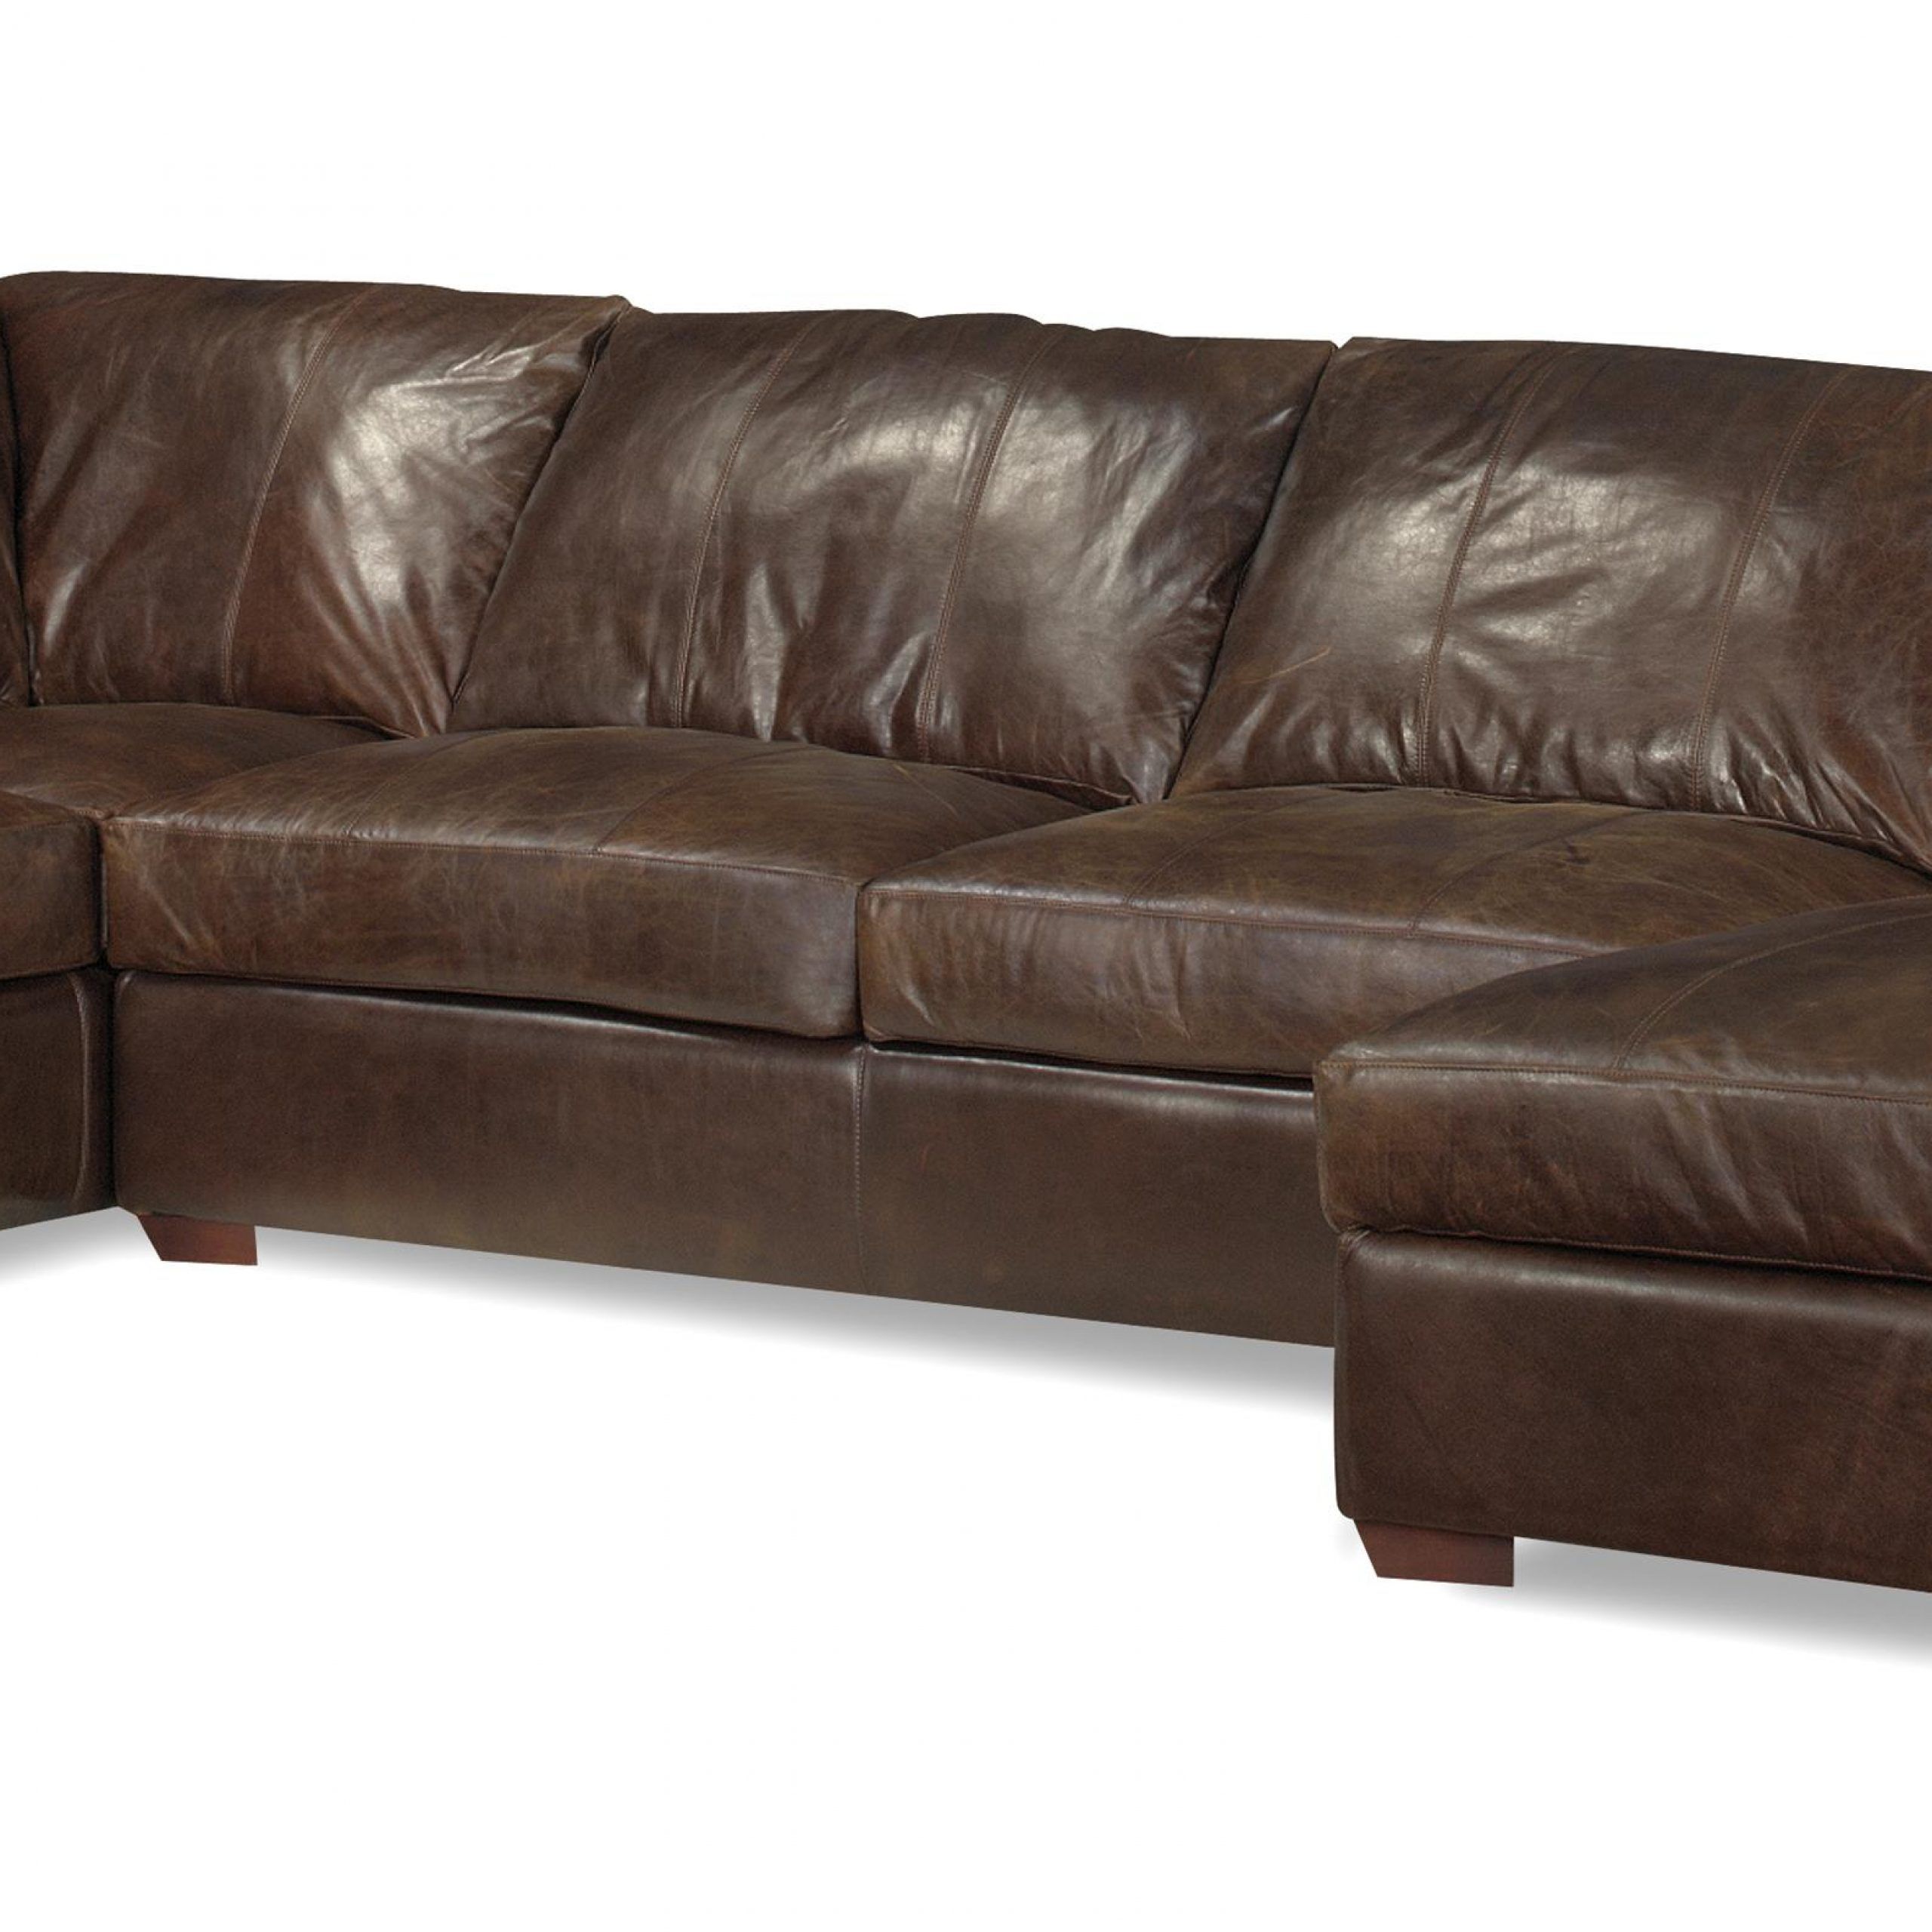 Leather Chaise Sectional Sofa Abbyson Tuscan Top Grain In 3Pc Miles Leather Sectional Sofas With Chaise (View 5 of 15)